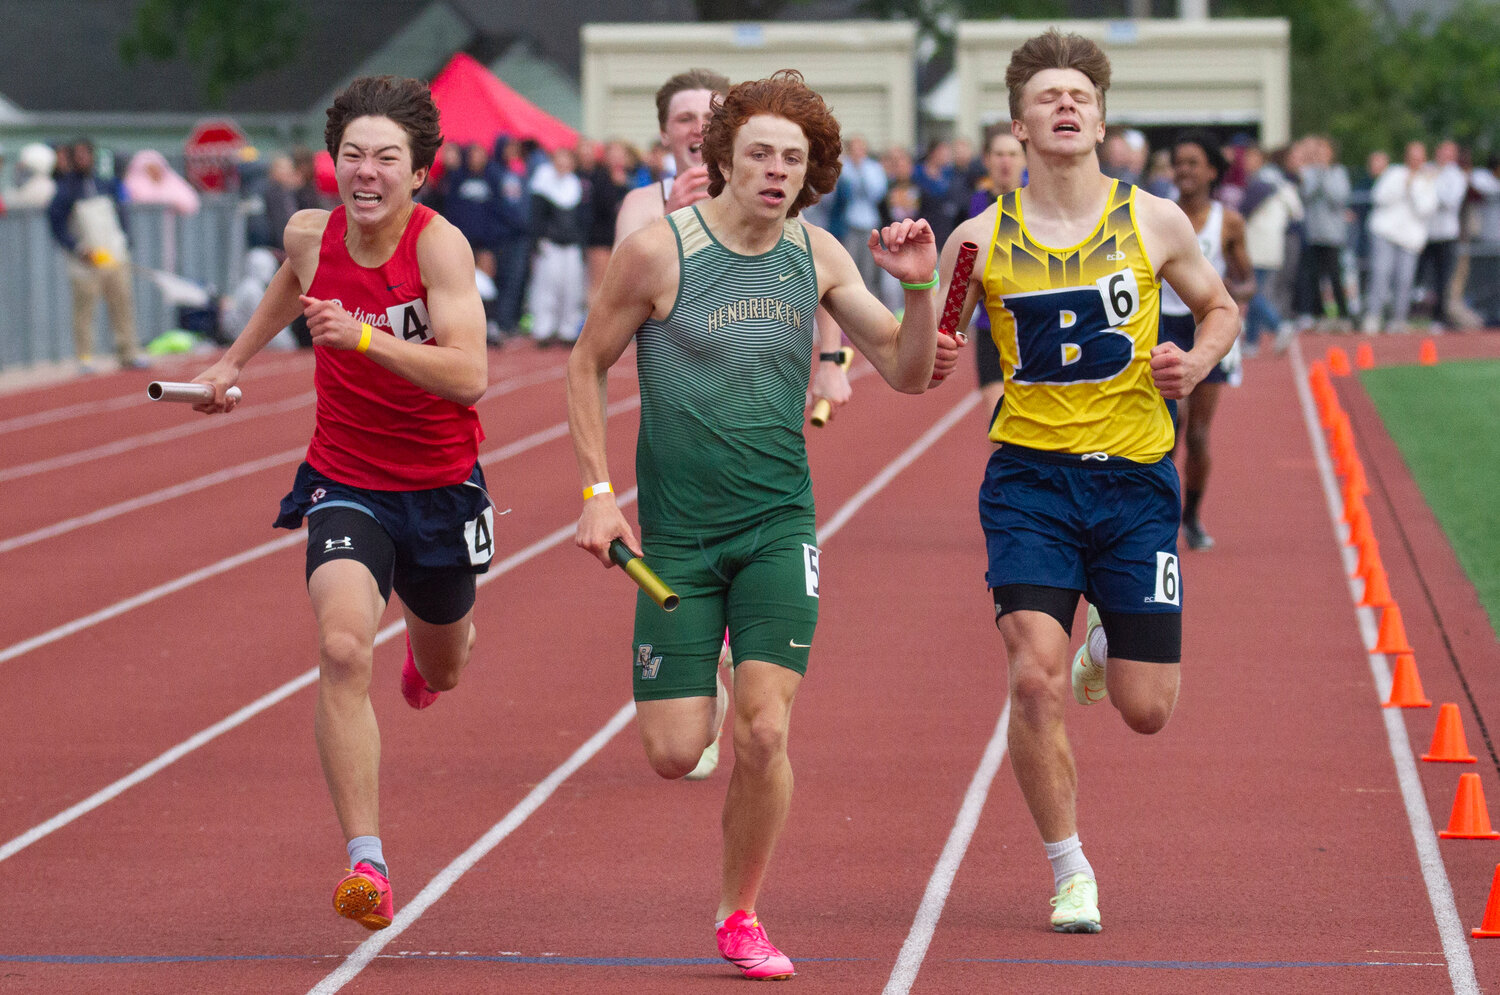 The Patriots Aidan Chen (left) is nipped at the finish line by a Bishop Hendricken runner during the 4x400-meter relay race. The team came in second with a time of 3:31.16. Chen also came in second in the high jump.